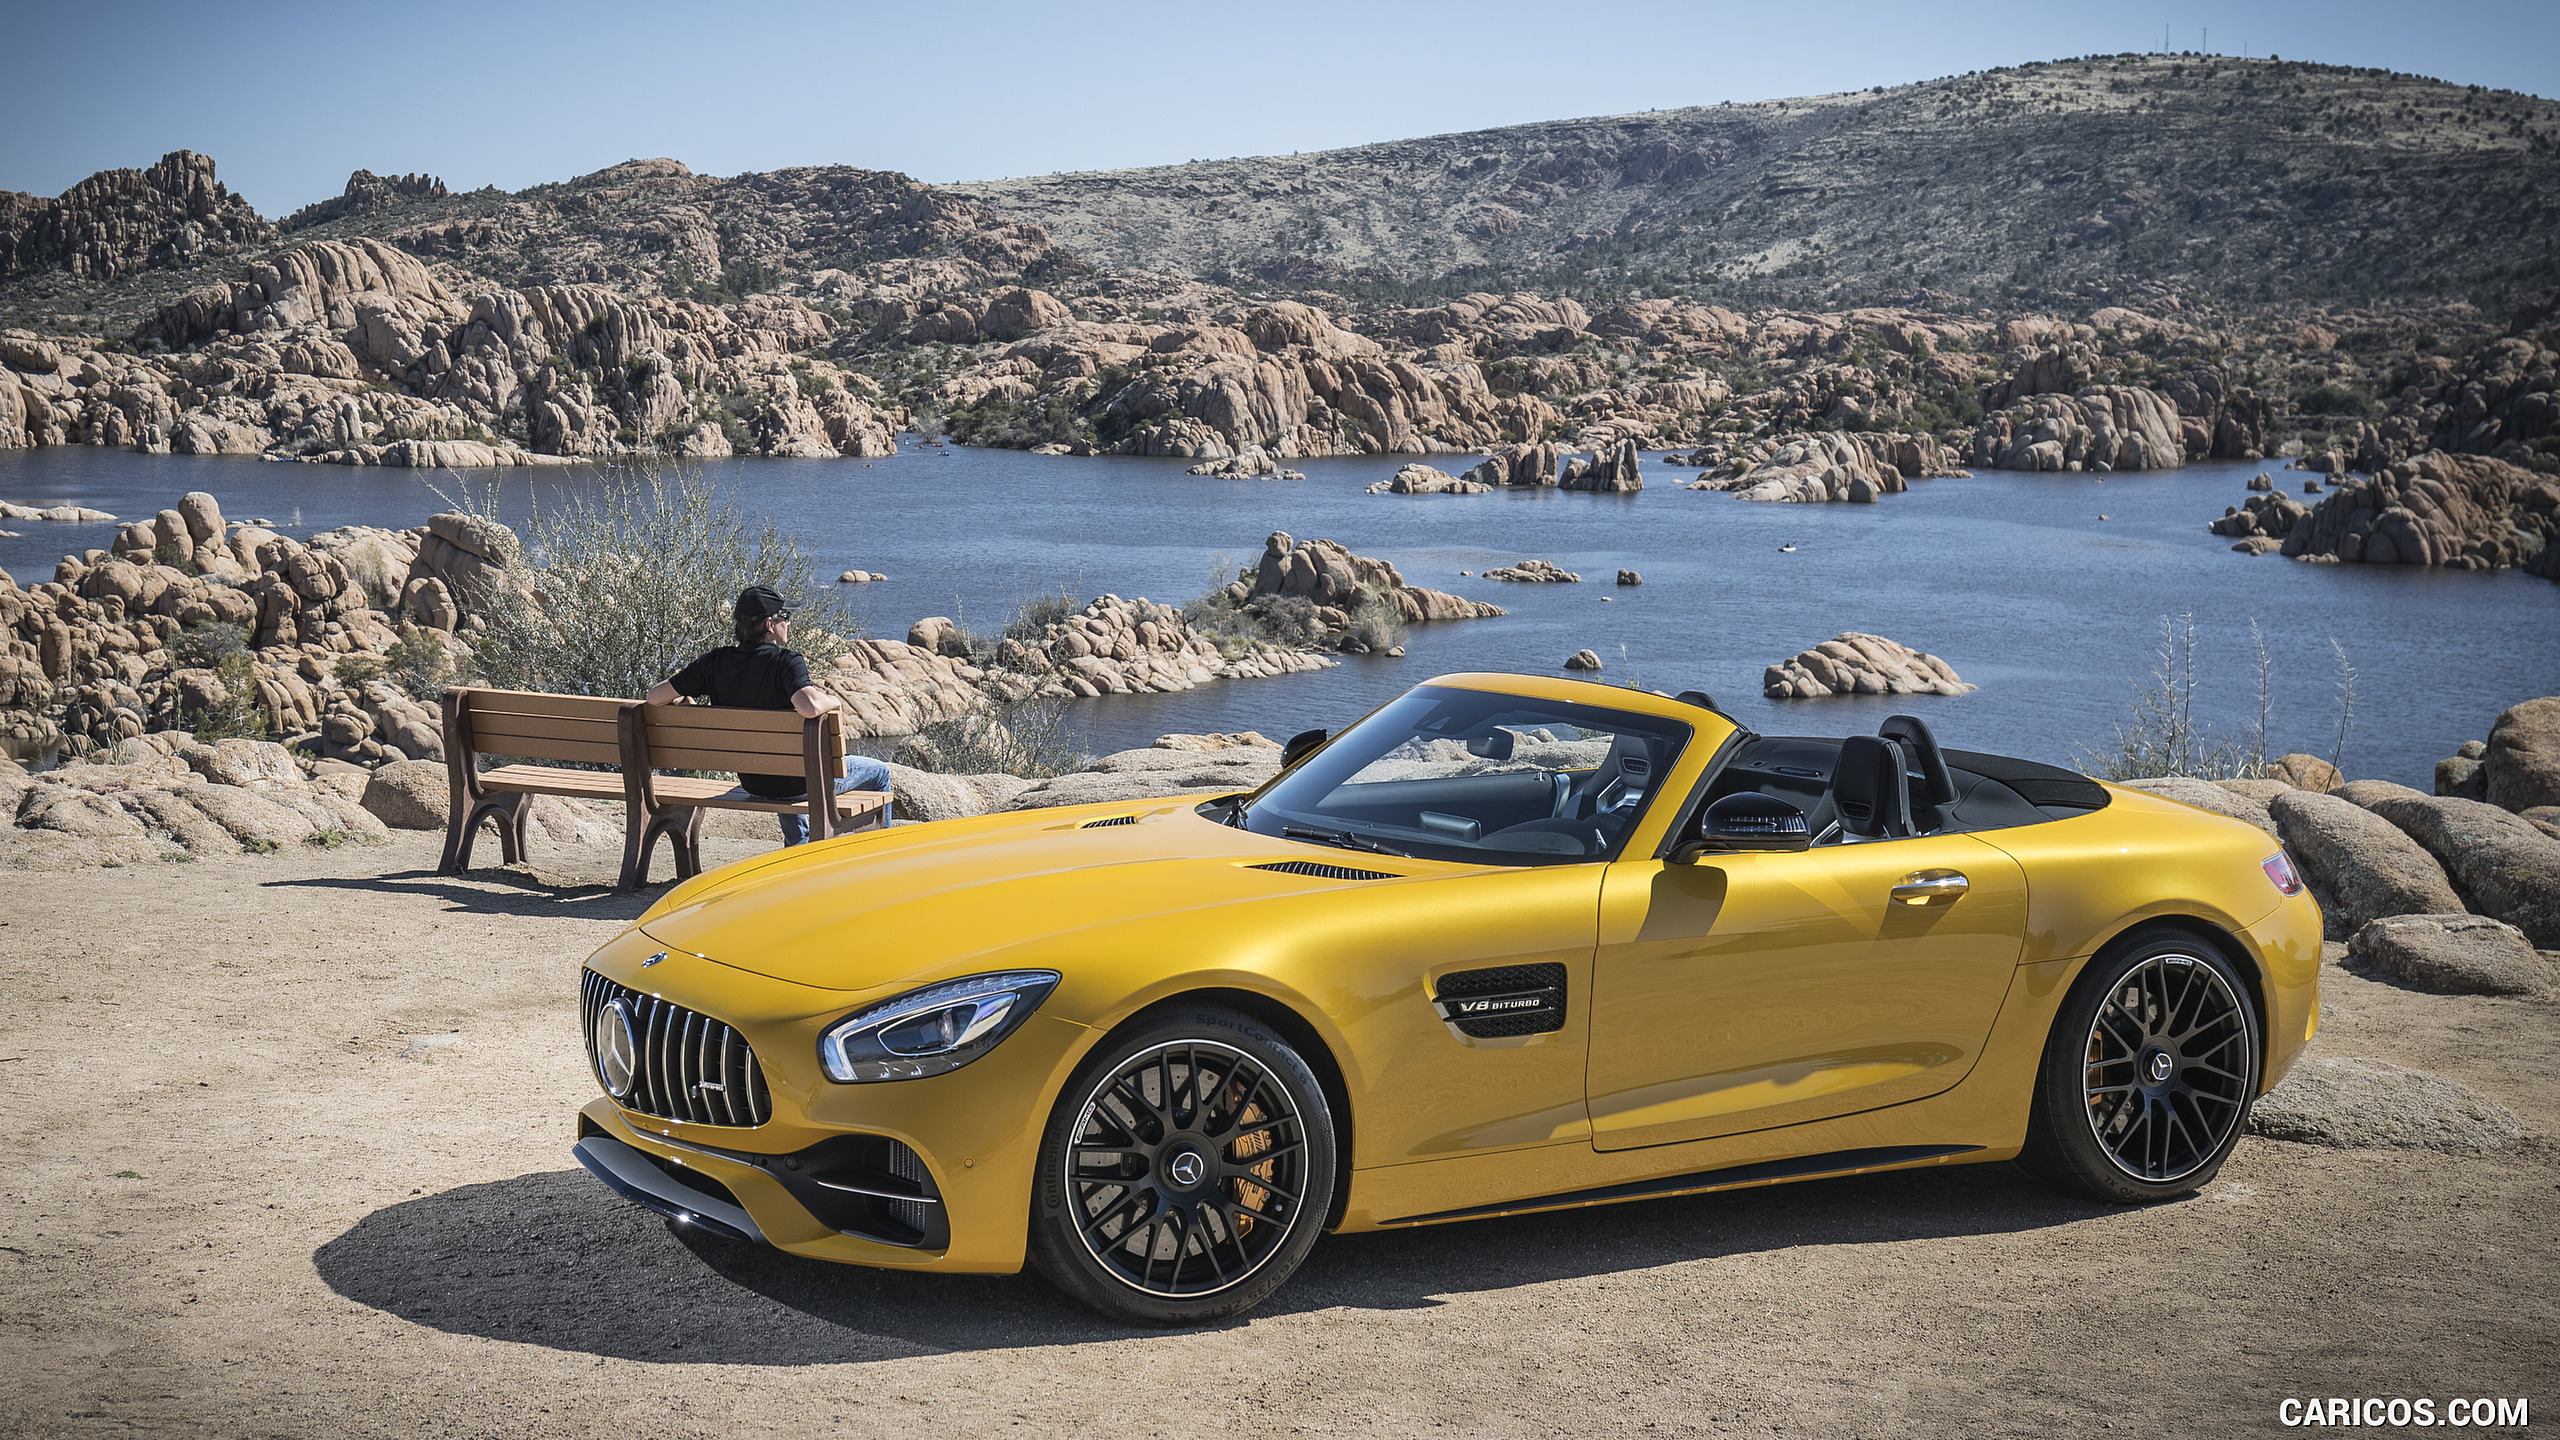 2018 Mercedes-AMG GT C Roadster - Front Three-Quarter, #181 of 350